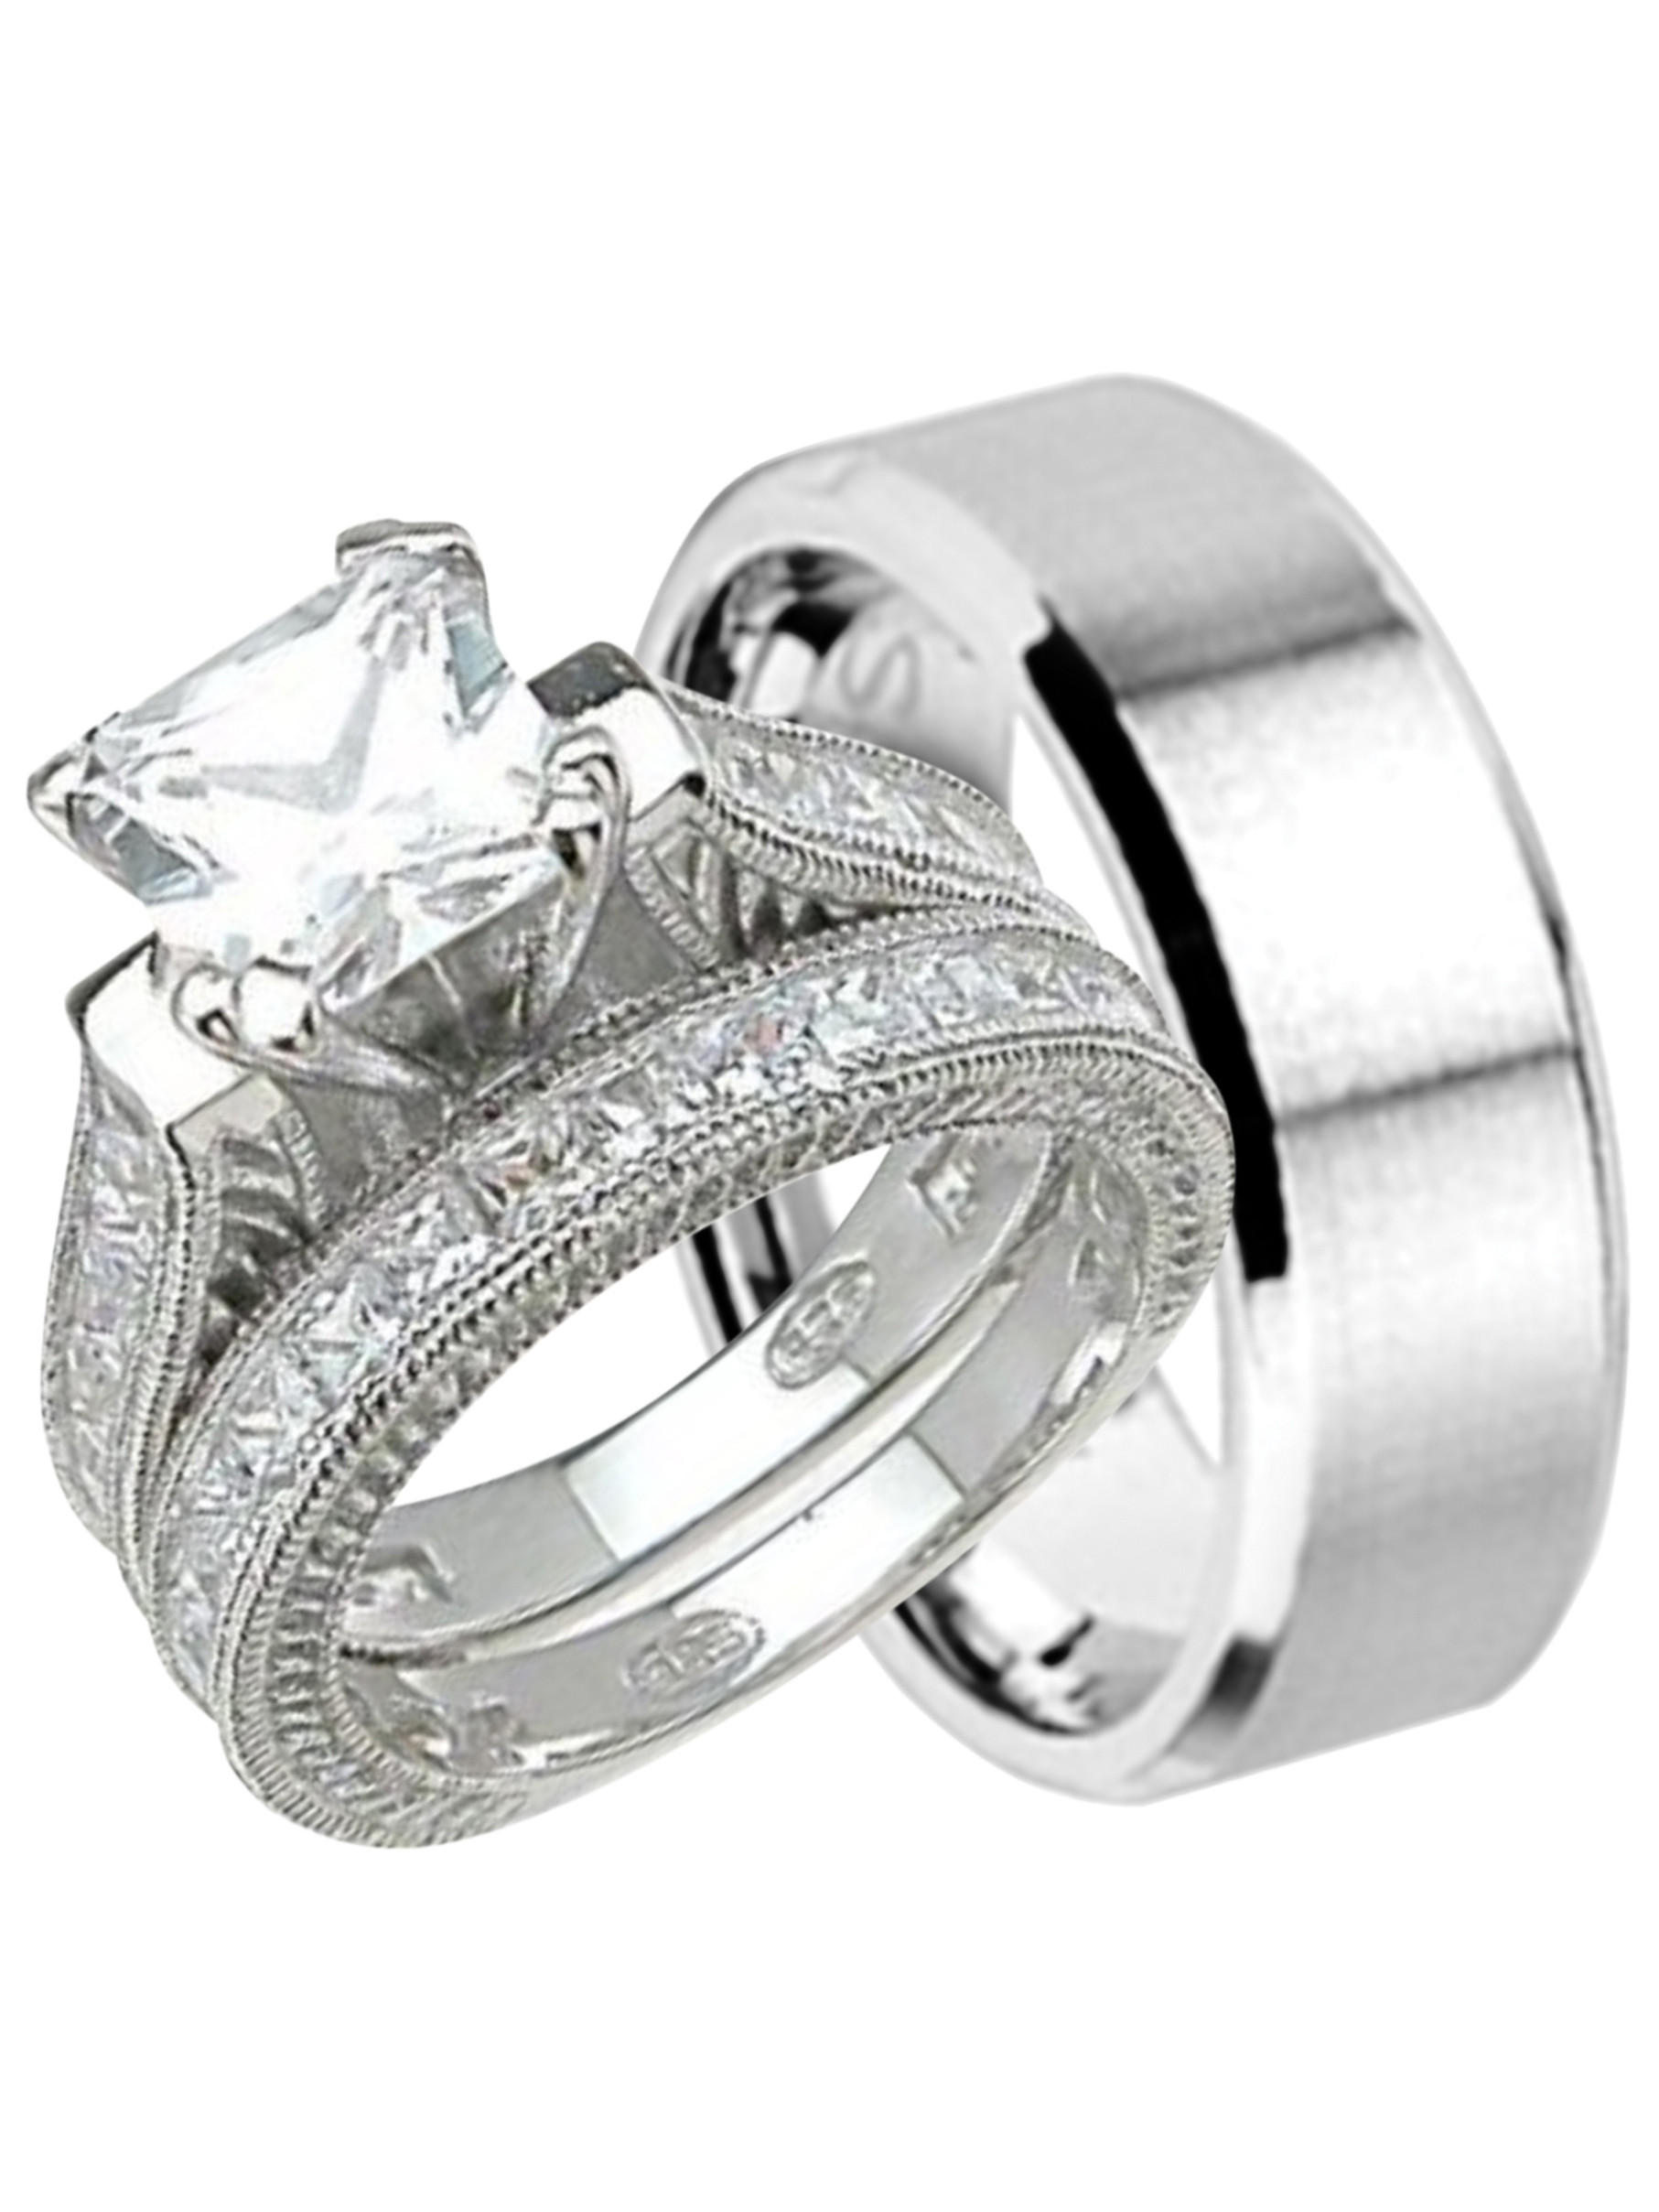 Walmart Wedding Rings Sets For Him And Her
 LaRaso & Co His and Hers Wedding Ring Set Cheap Wedding